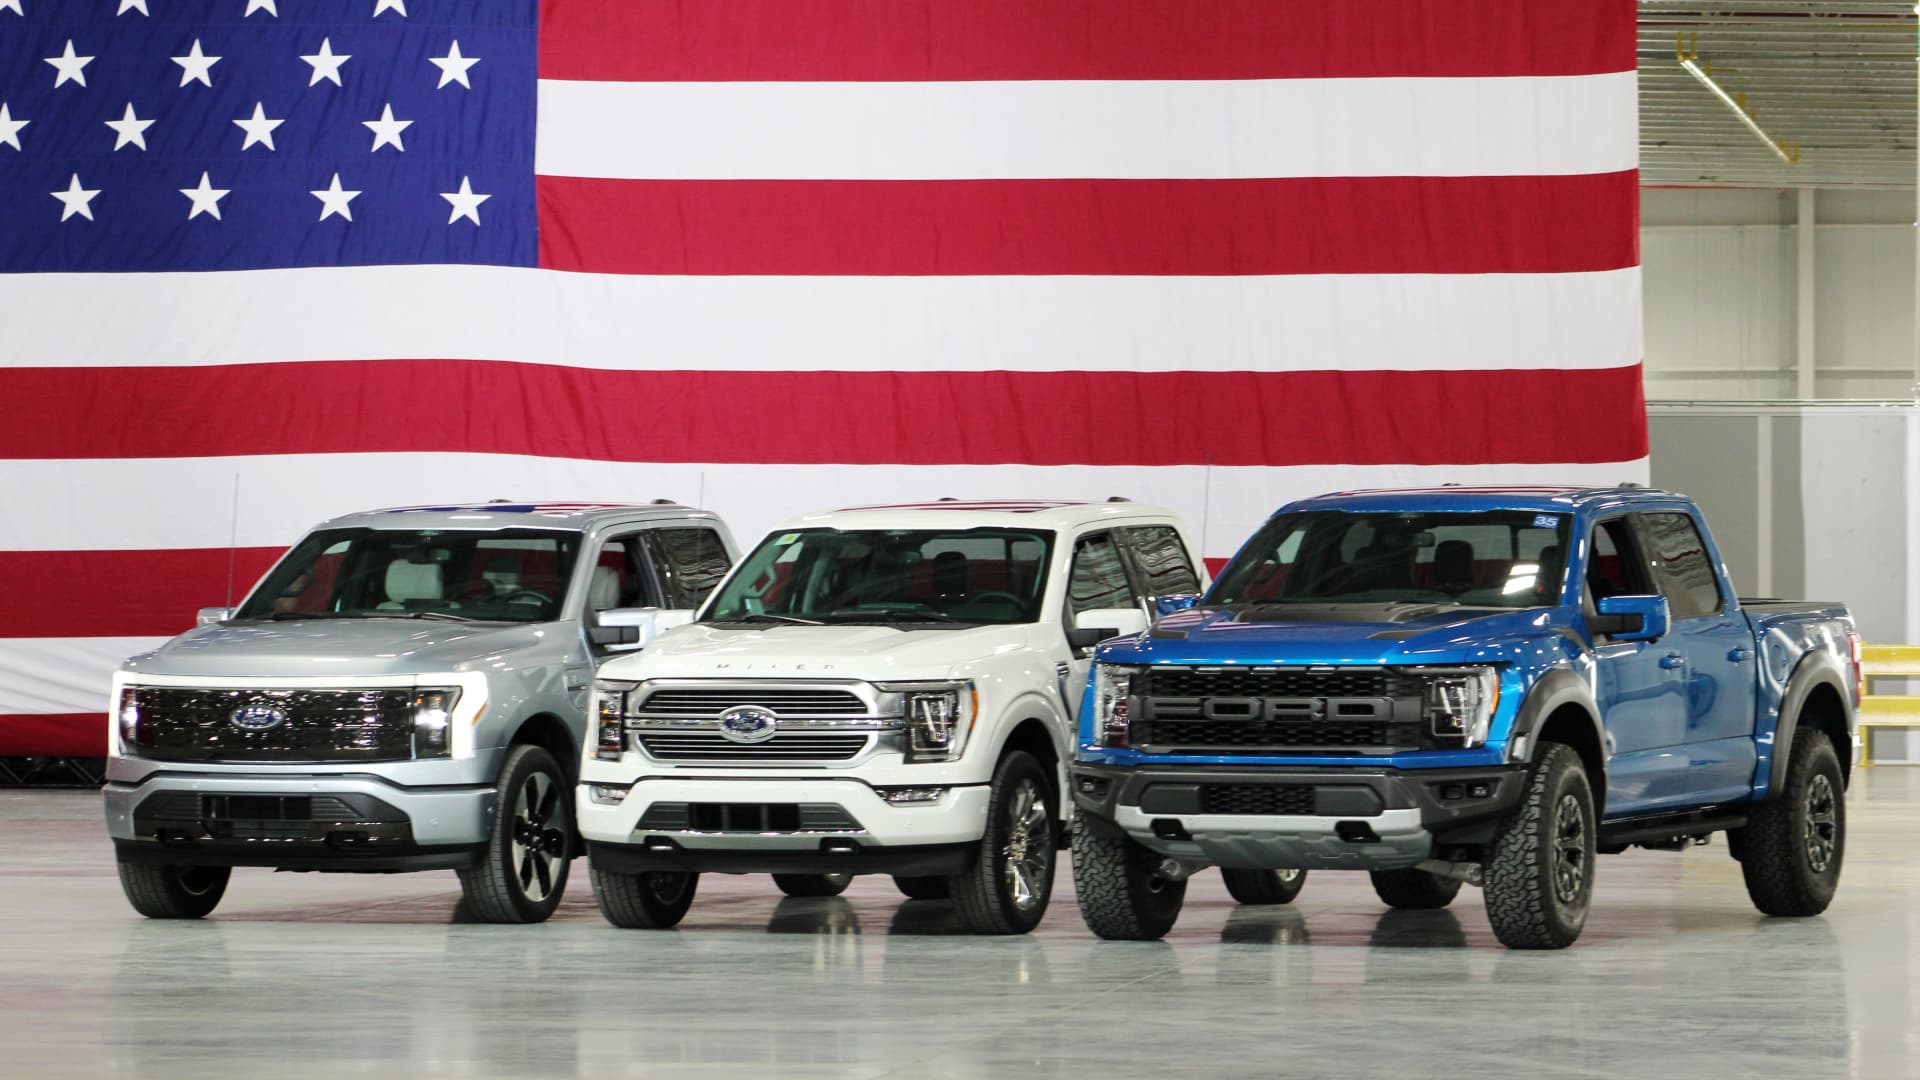 Ford revealed its highly anticipated all-electric F-150 Lightning pickup truck (left) at Ford's Rouge Electric Vehicle Center in Dearborn, Mich. during a tour by President Joe Biden on May 18, 2021.